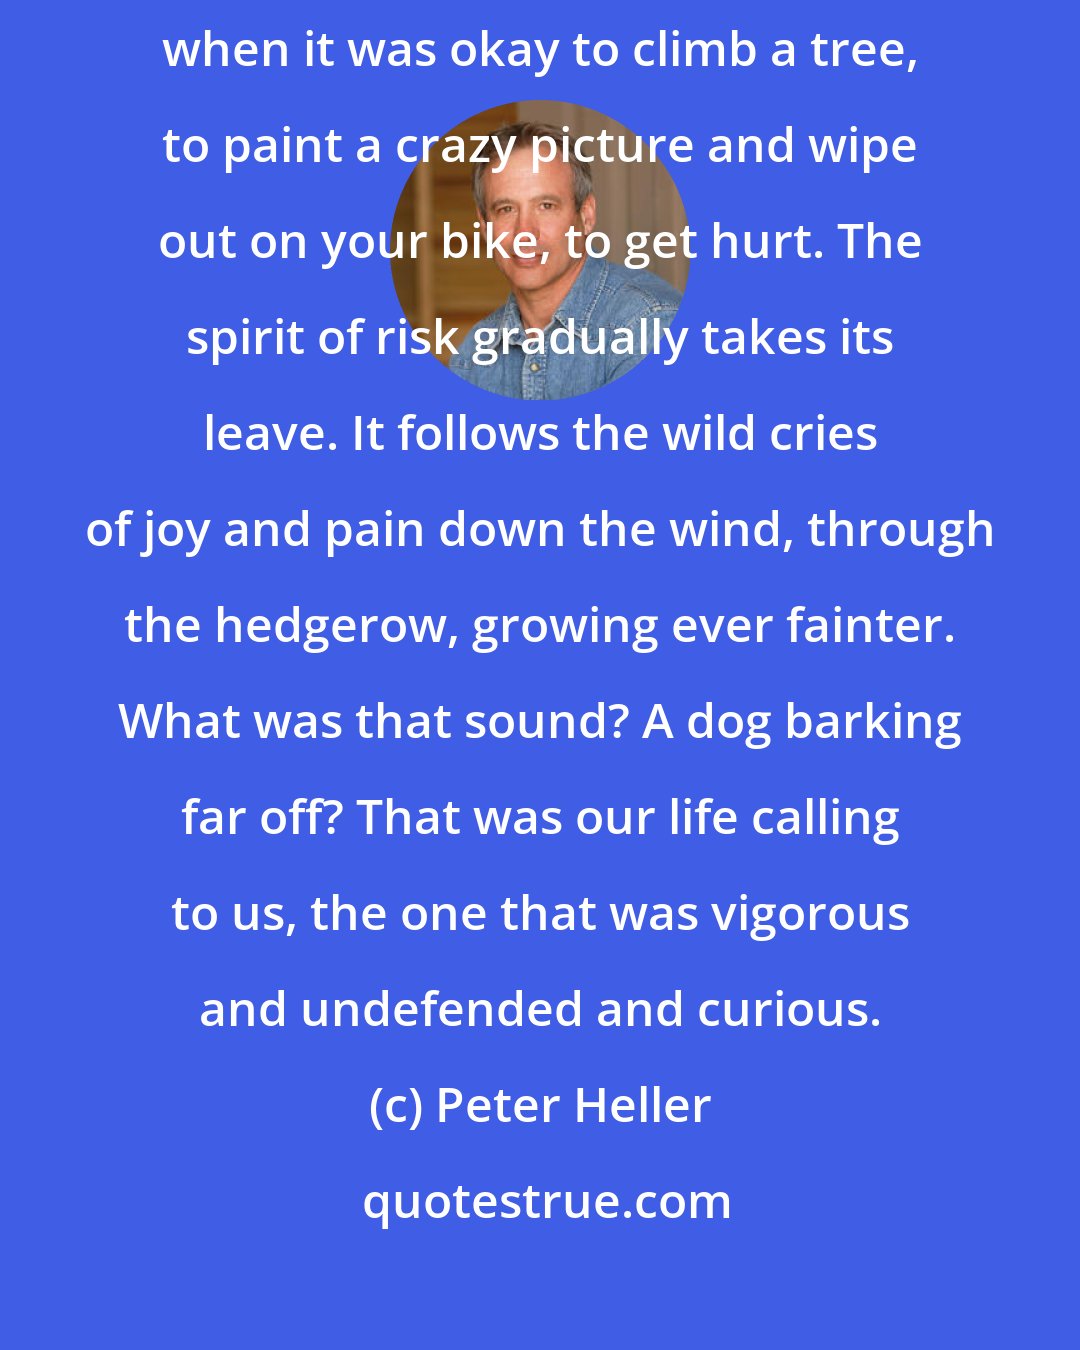 Peter Heller: Maybe freedom really is nothing left to lose. You had it once in childhood, when it was okay to climb a tree, to paint a crazy picture and wipe out on your bike, to get hurt. The spirit of risk gradually takes its leave. It follows the wild cries of joy and pain down the wind, through the hedgerow, growing ever fainter. What was that sound? A dog barking far off? That was our life calling to us, the one that was vigorous and undefended and curious.